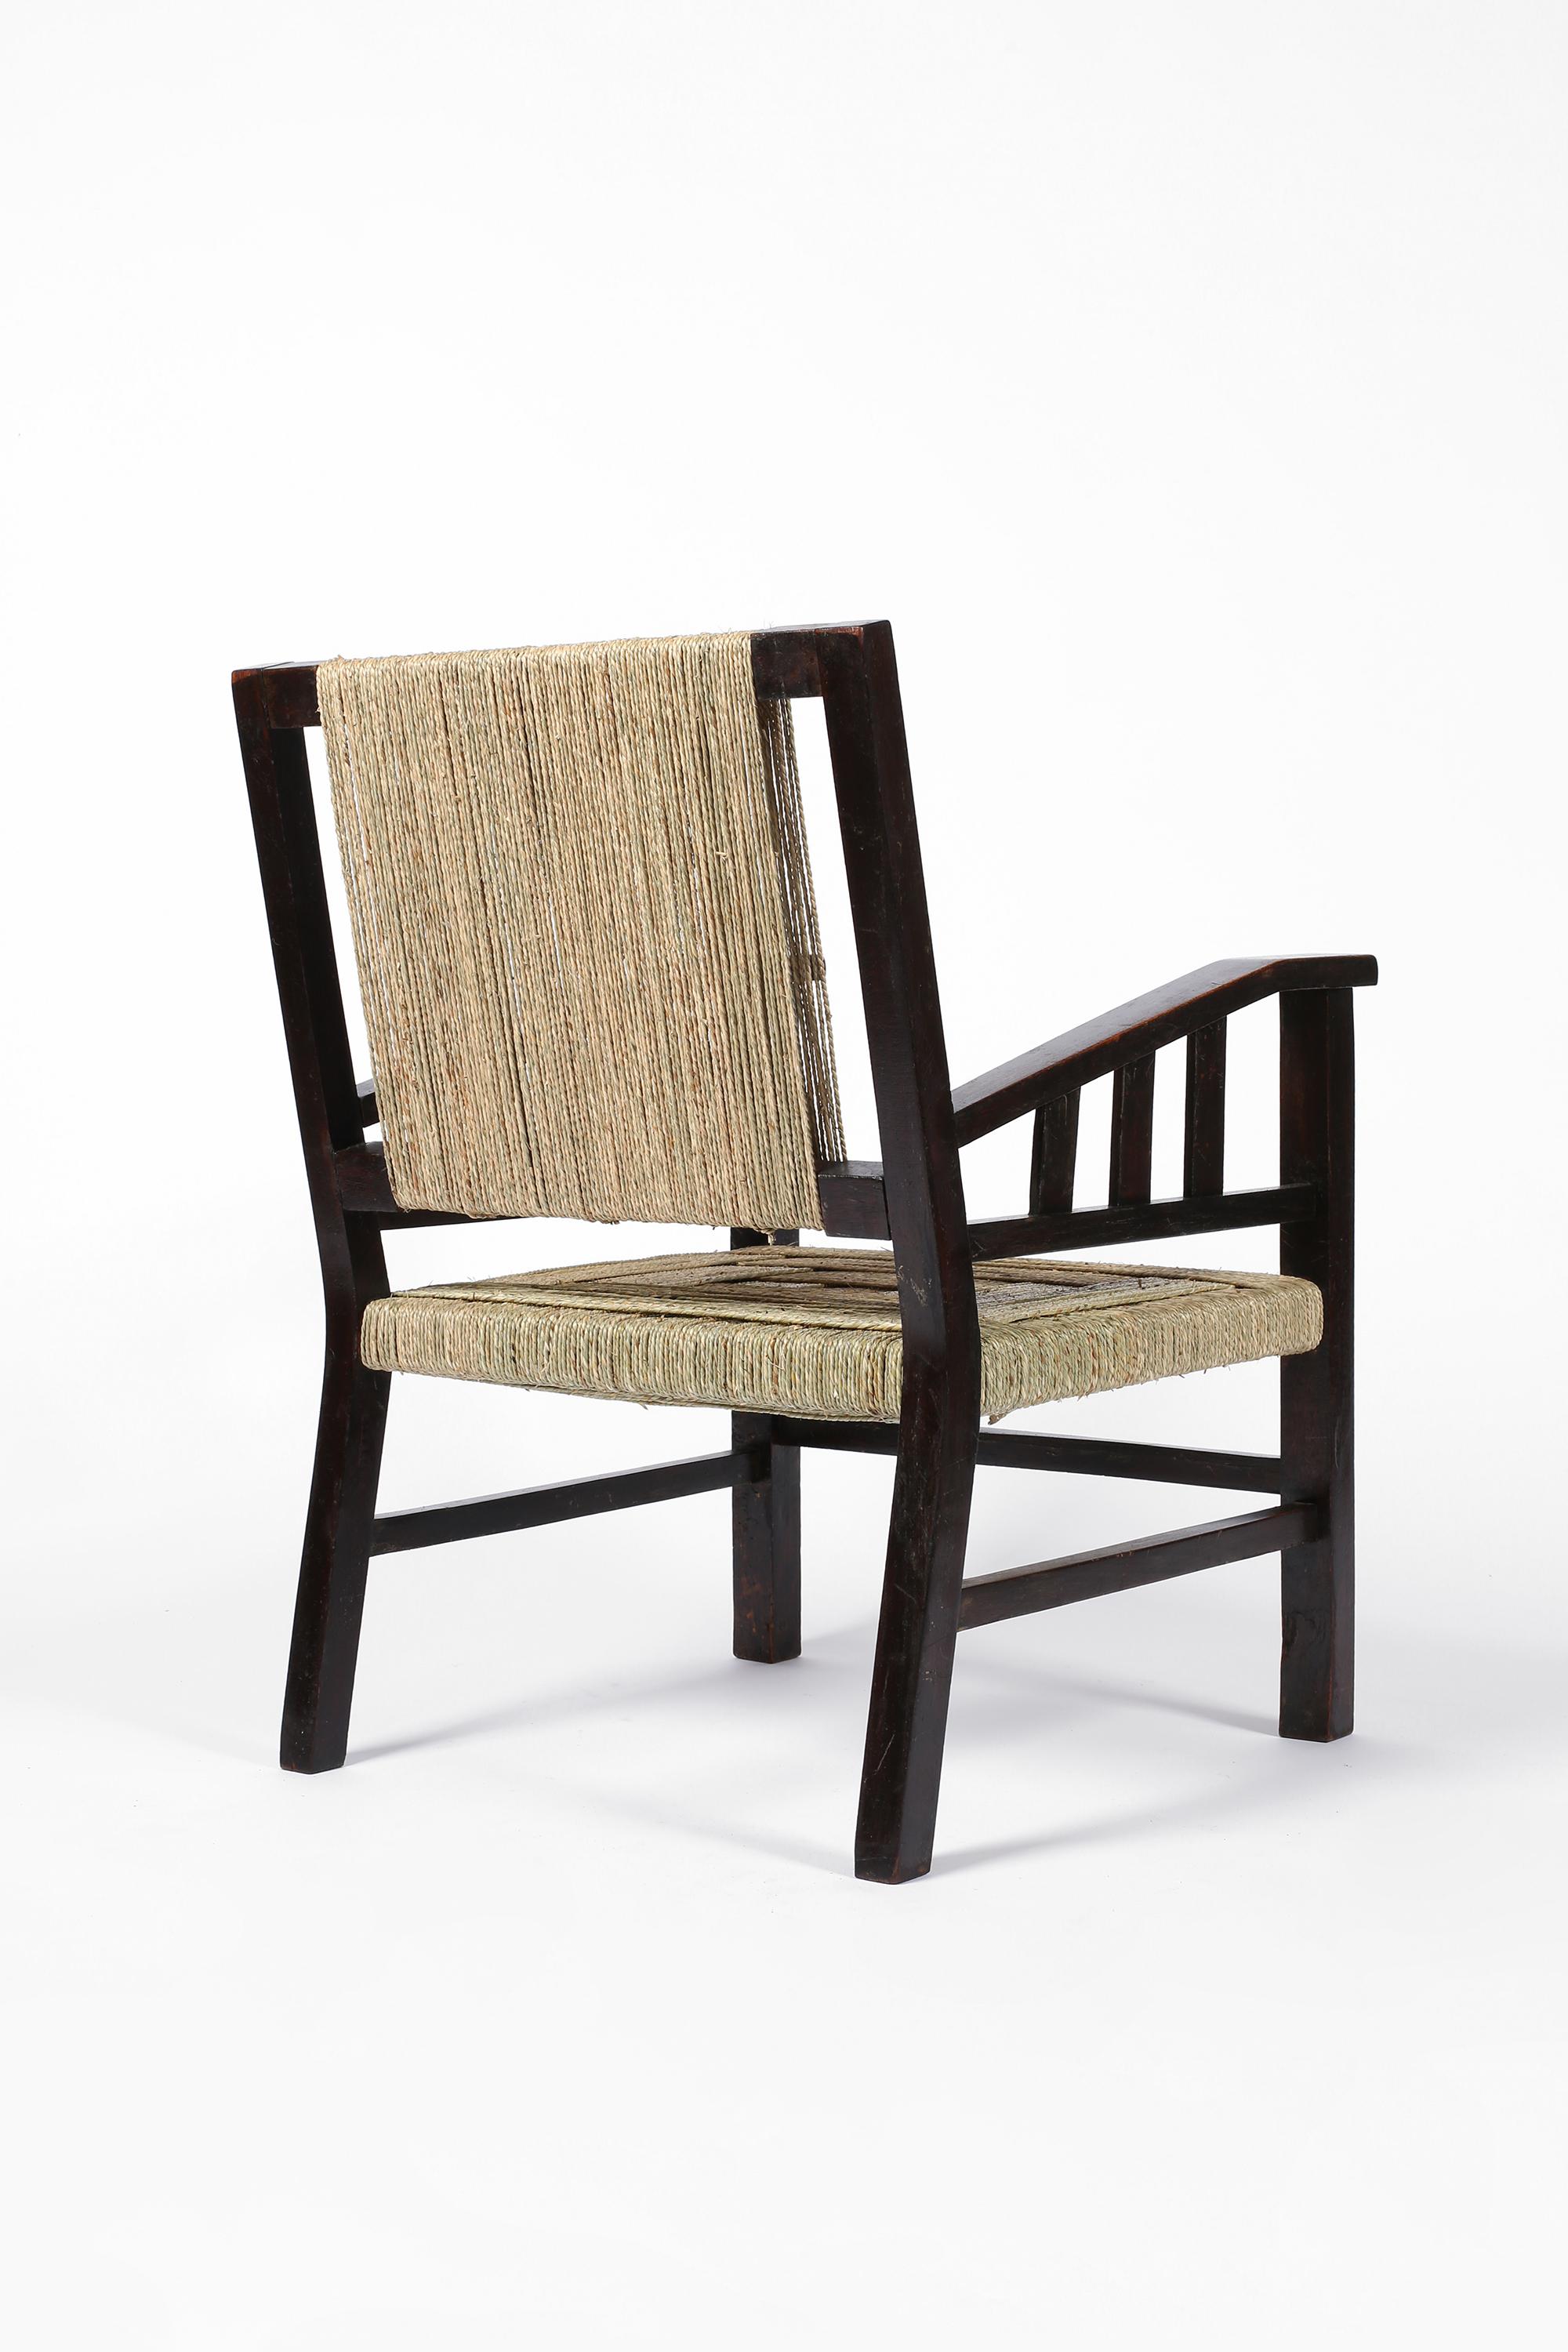 20th Century 1930s French Modernist Art Deco Armchair by Francis Jourdain in Beech and Rope